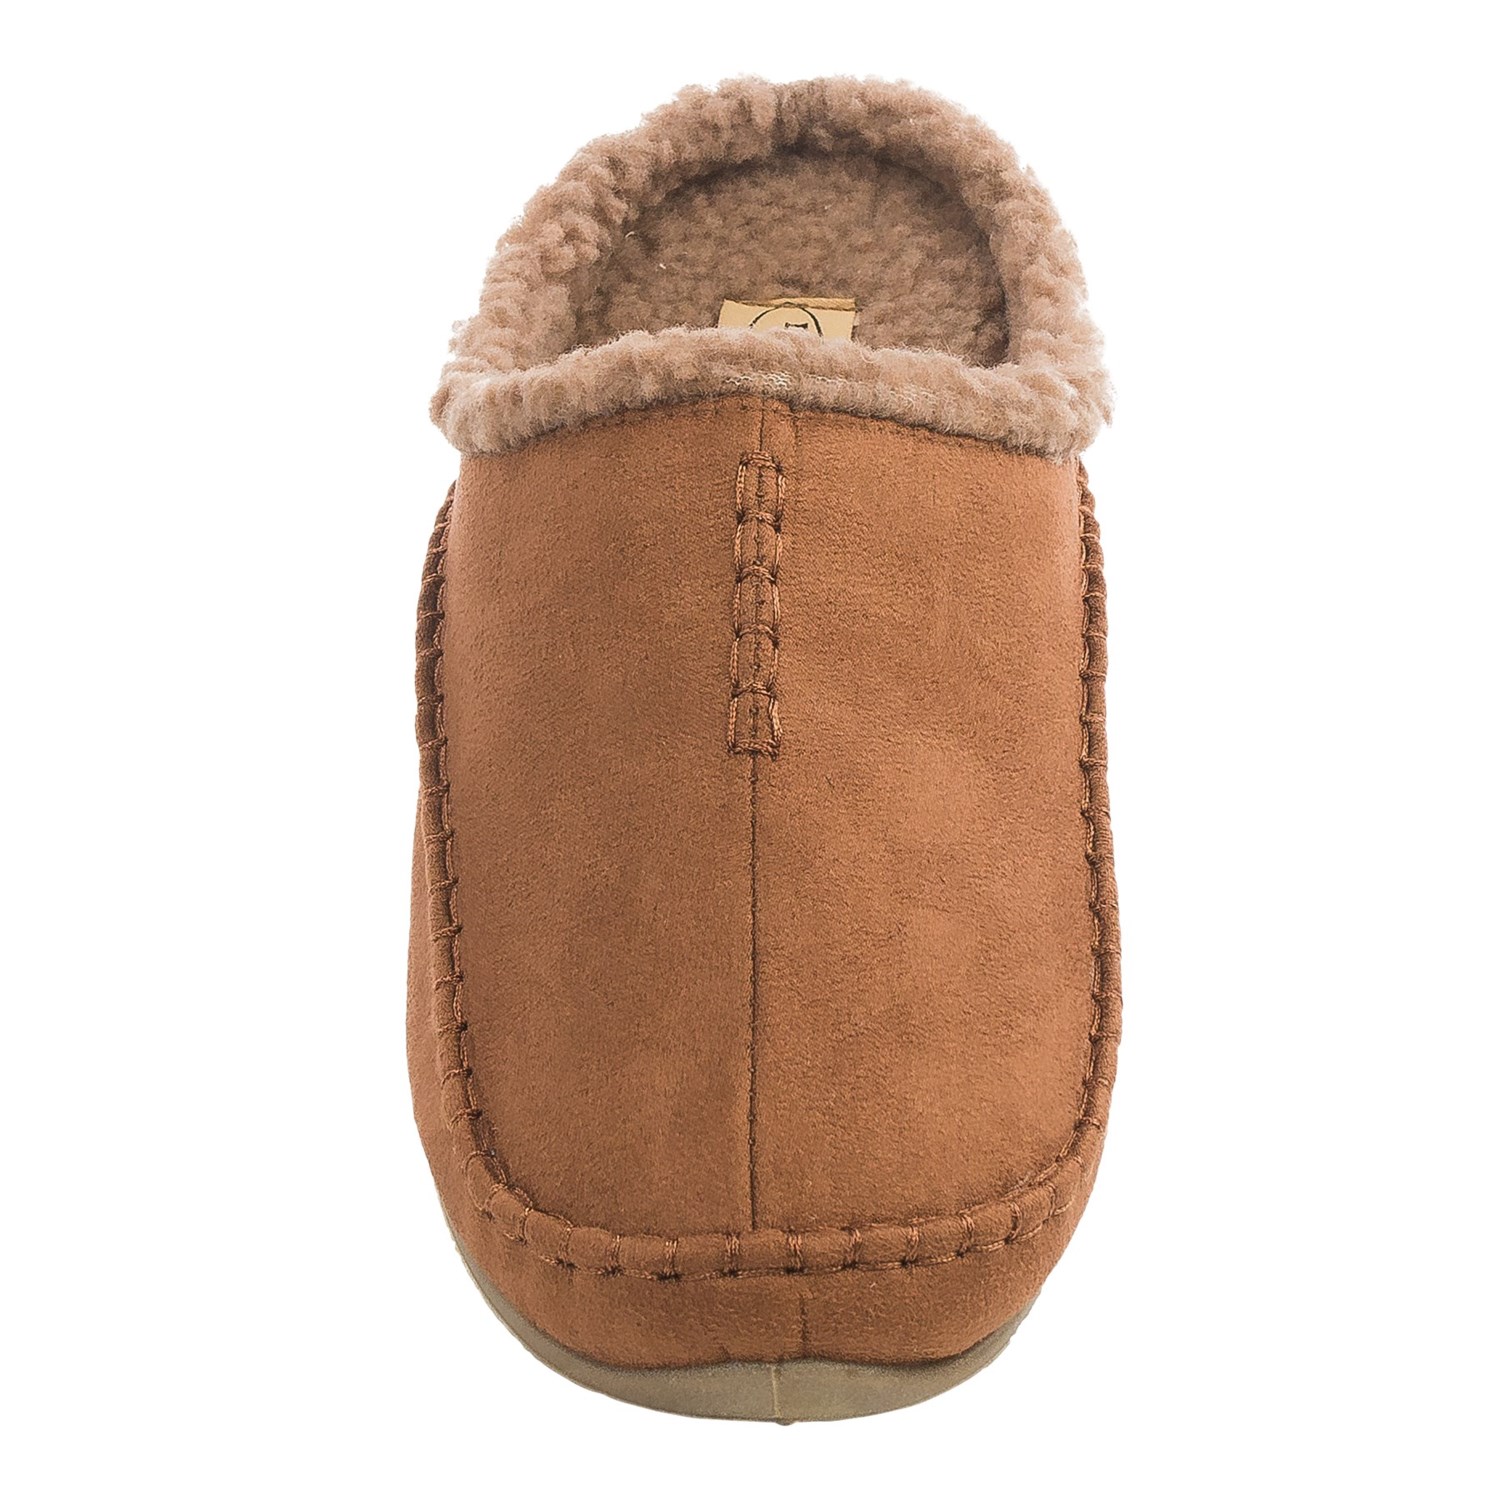 Deer Stags Arctic Slippers (For Men) - Save 77%